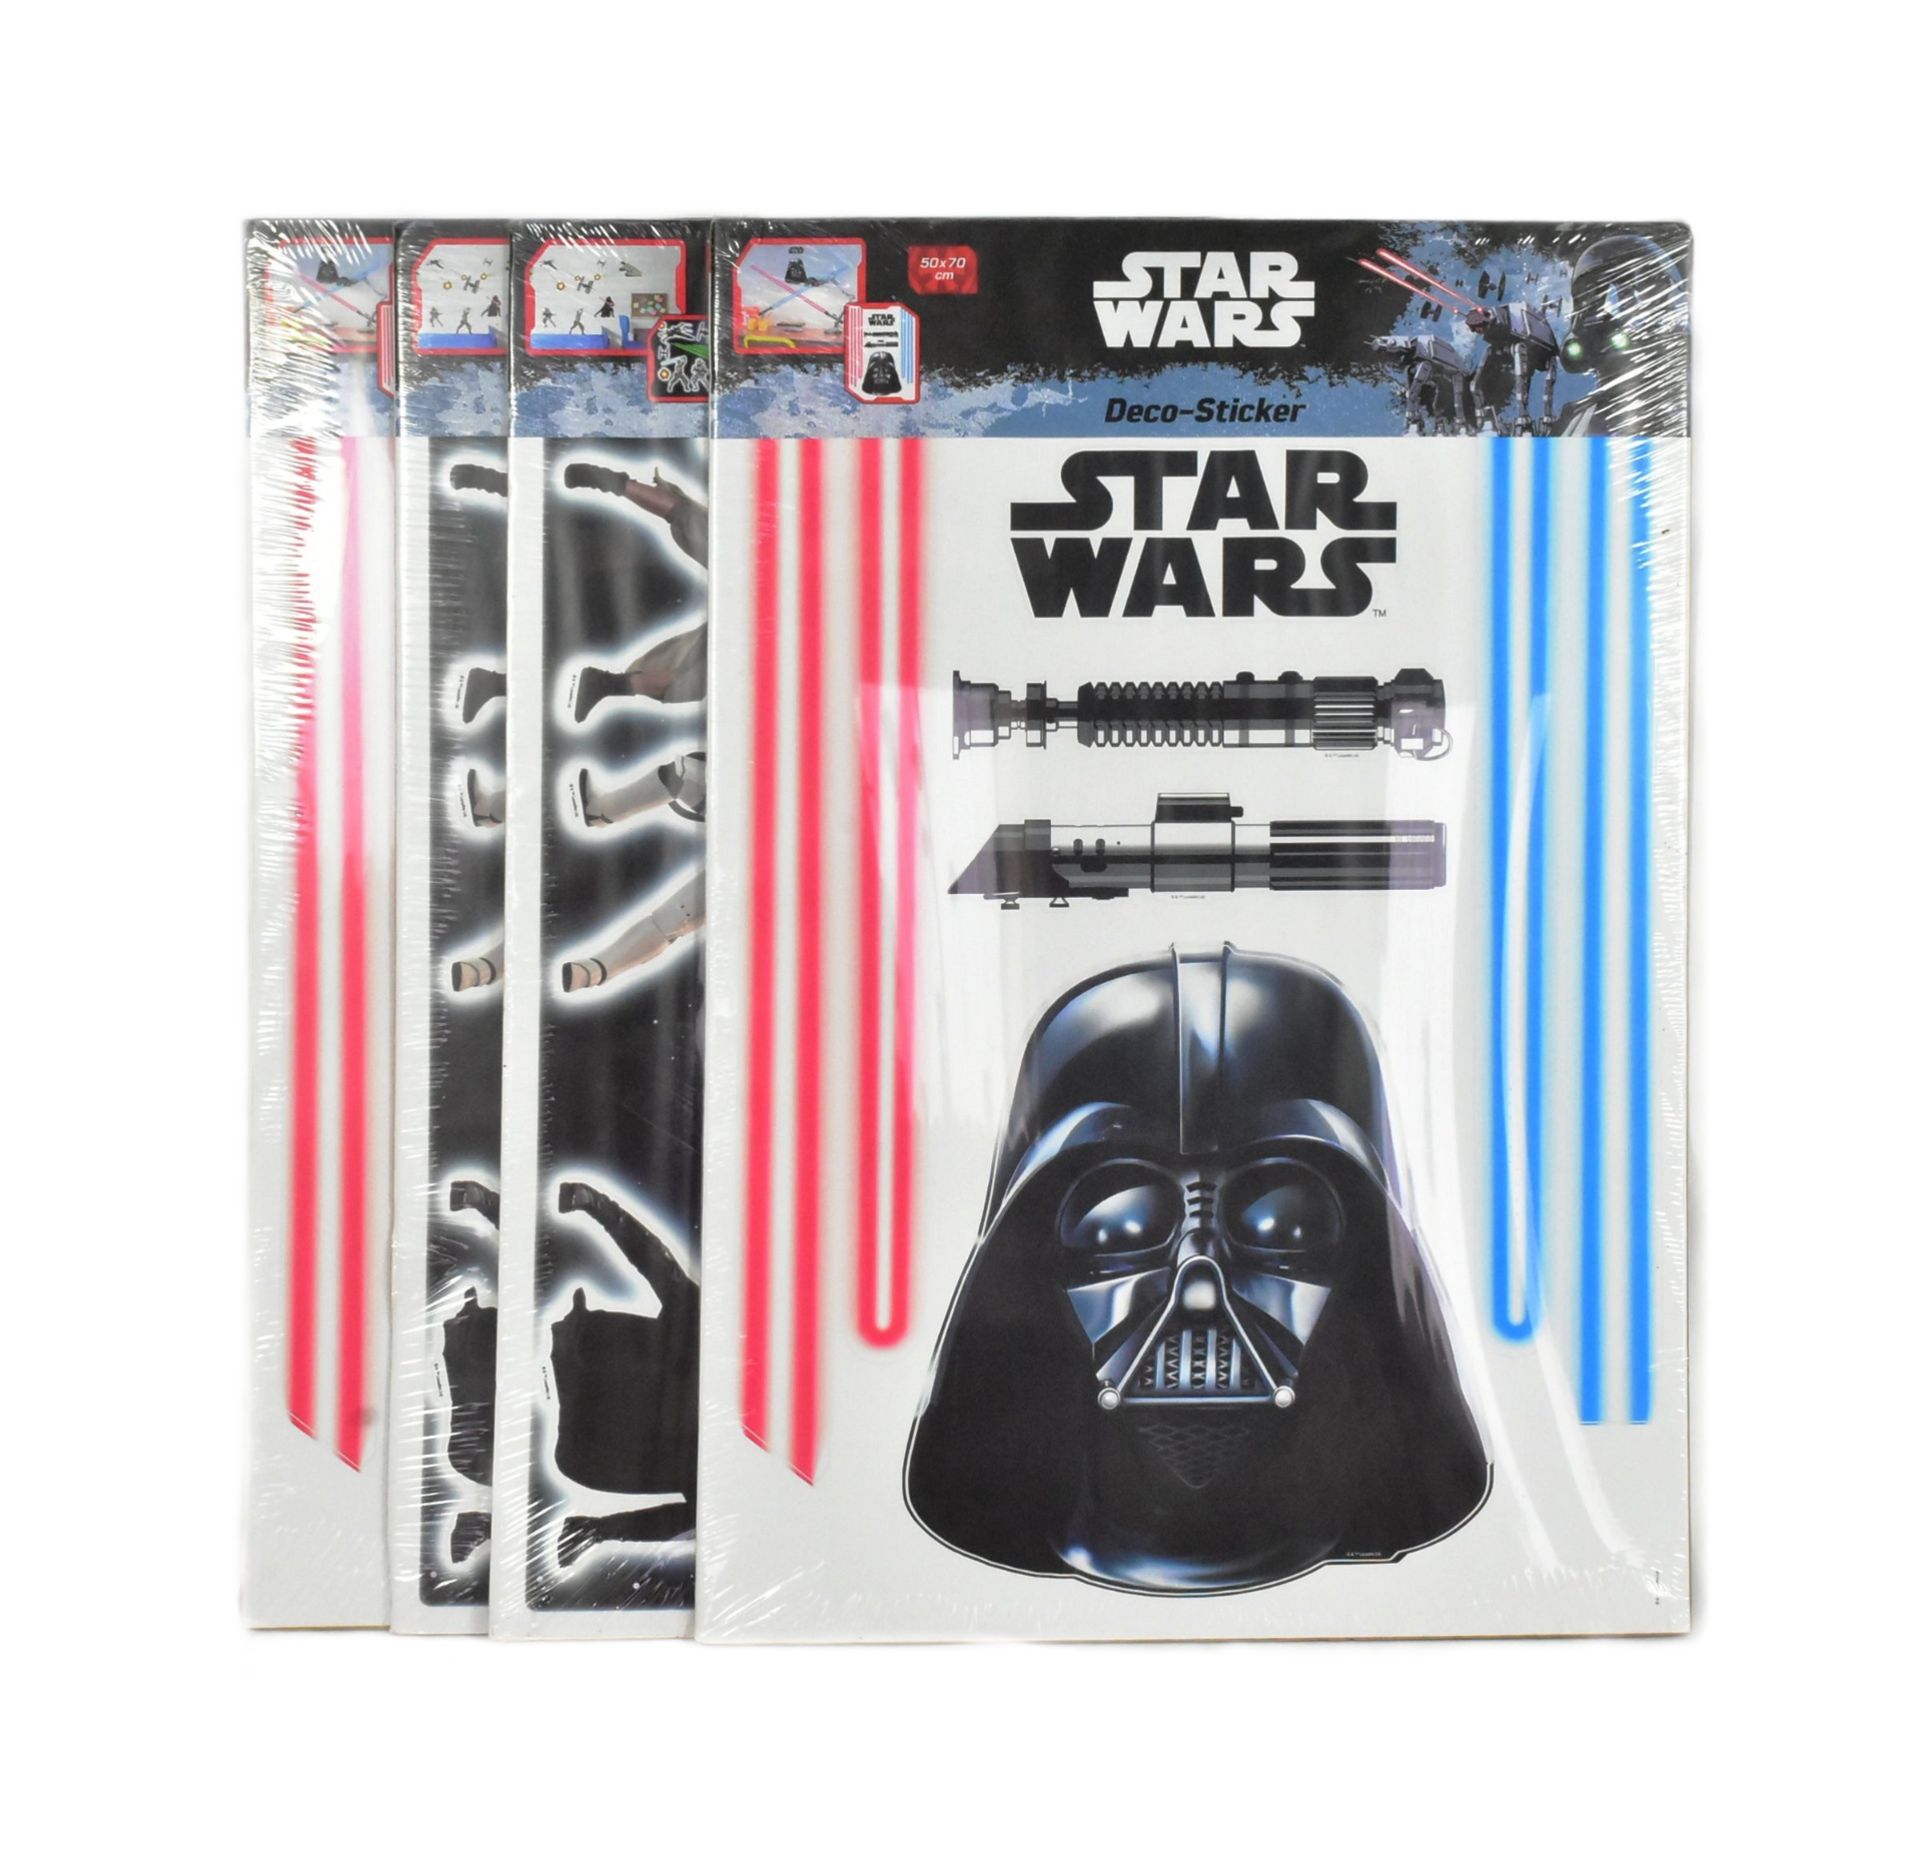 COLLECTION OF DISNEY STAR WARS DECO STICKERS